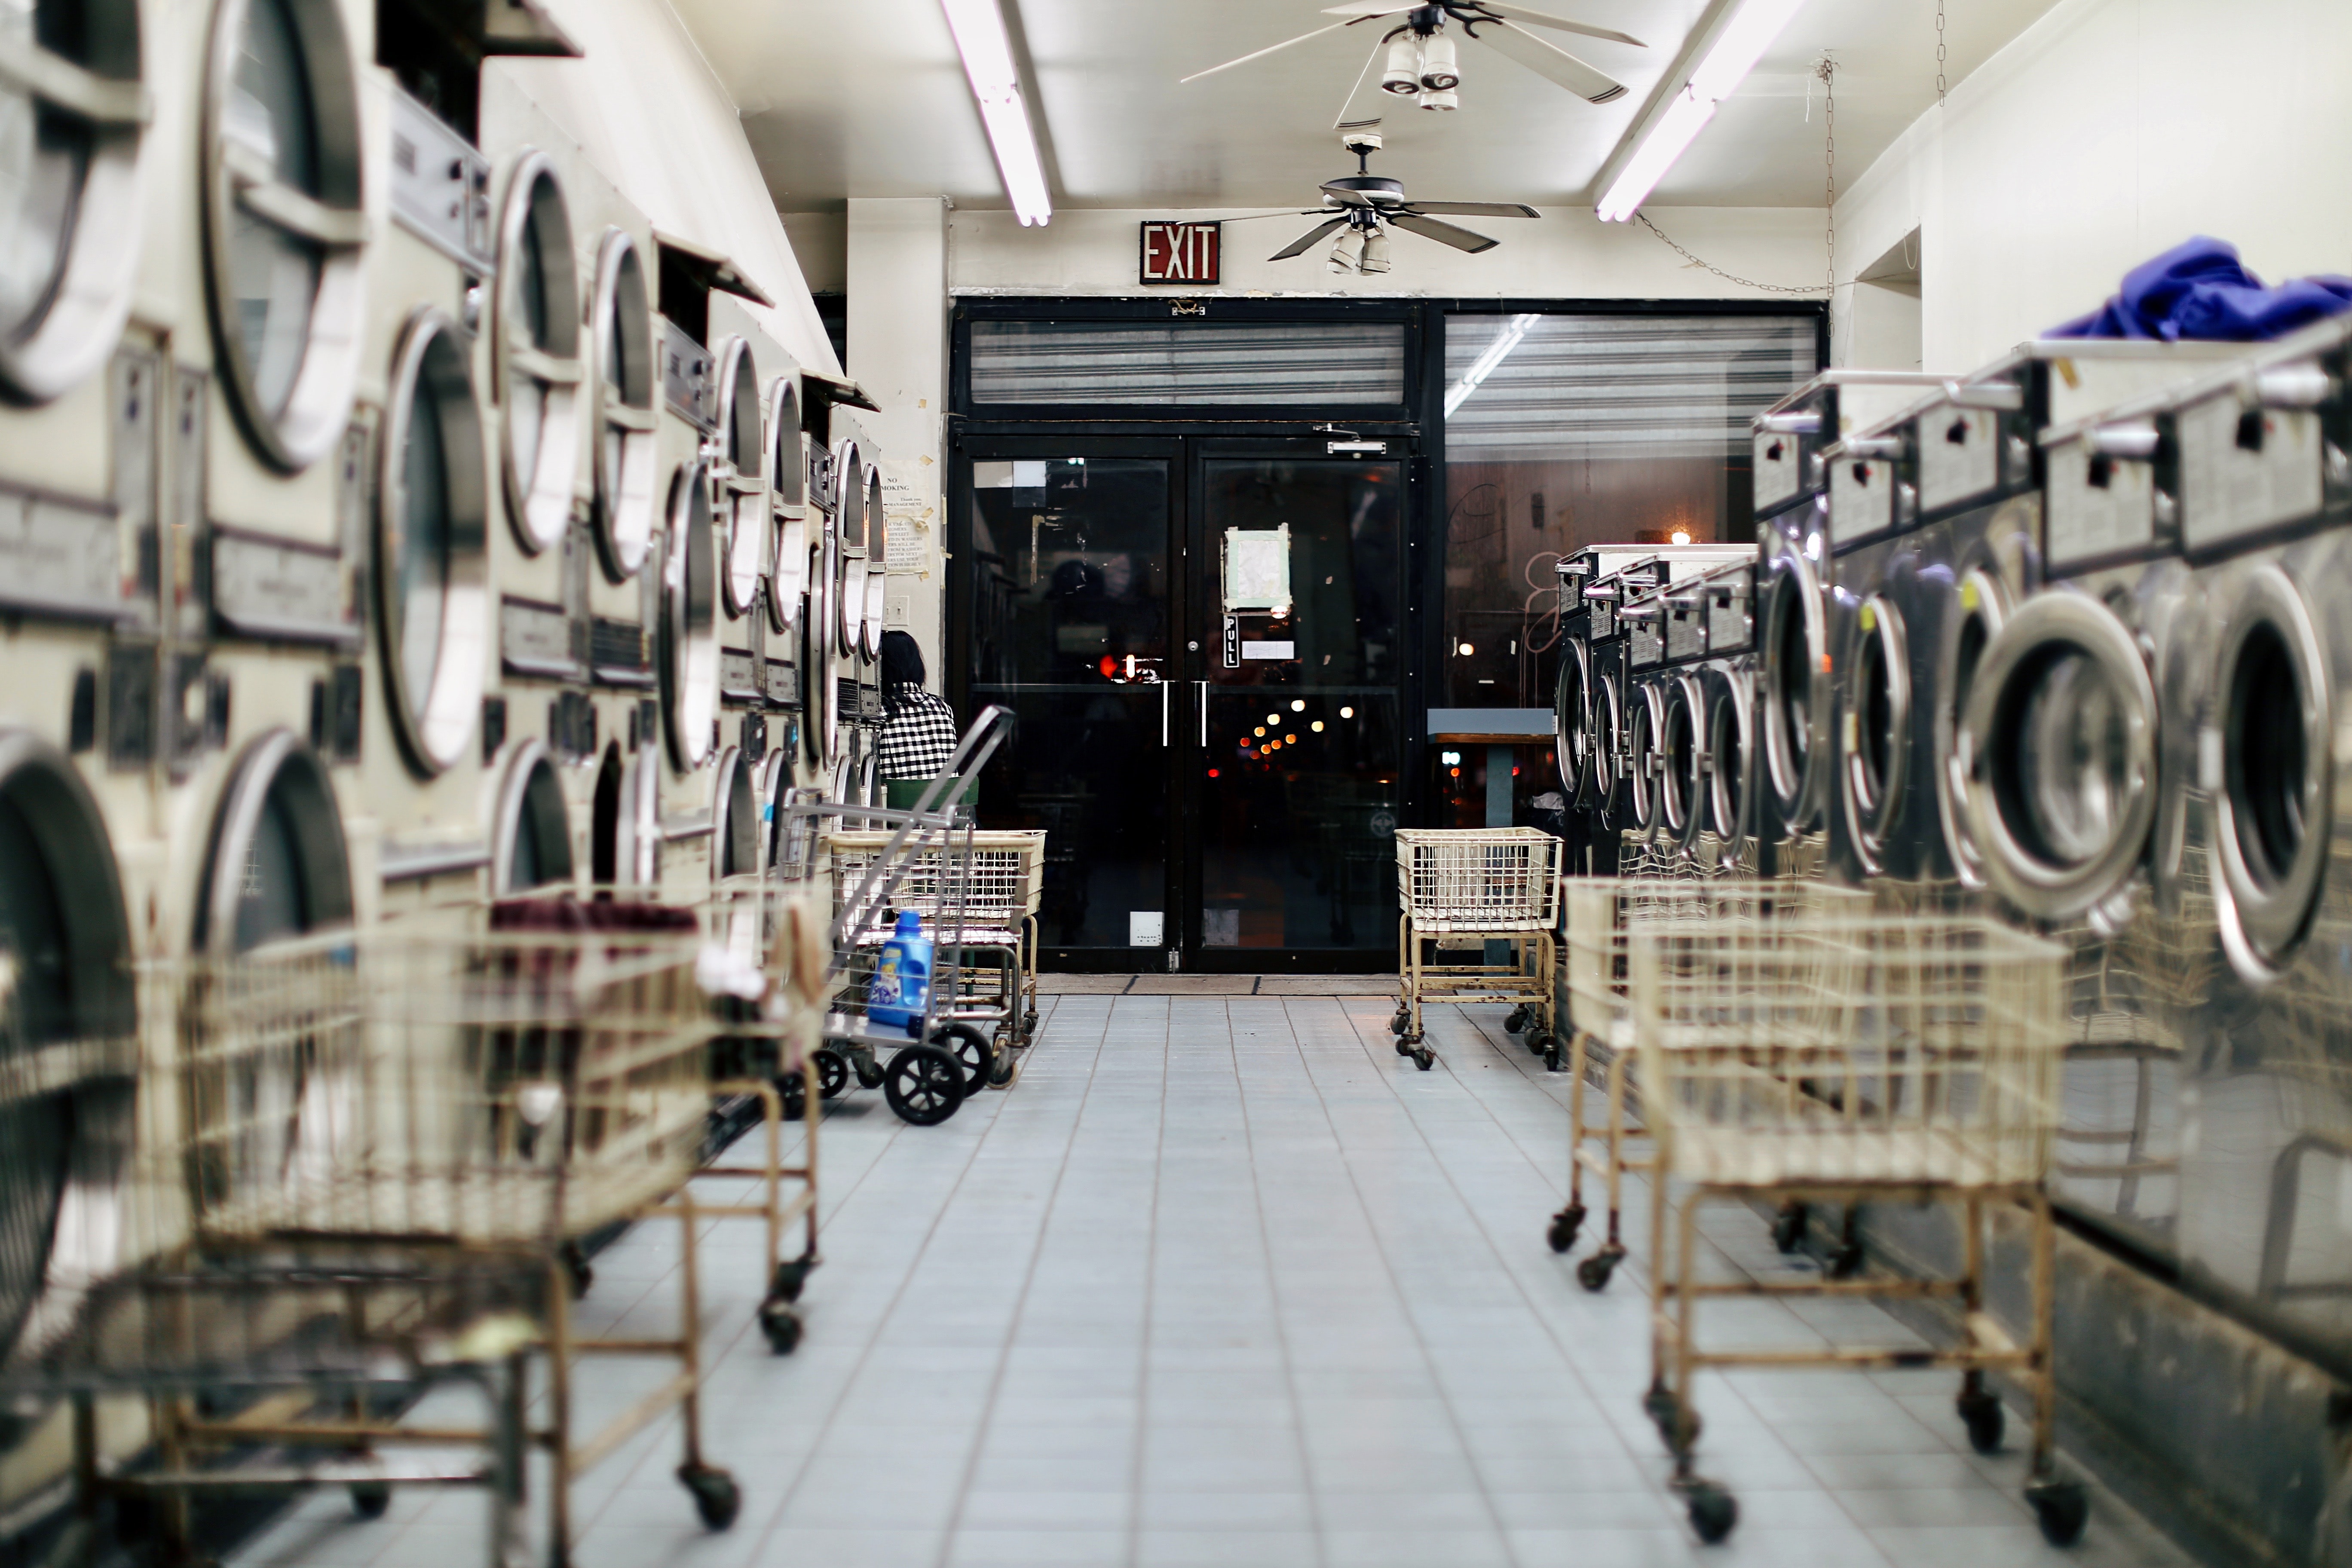 Well-lit laundromat with carts